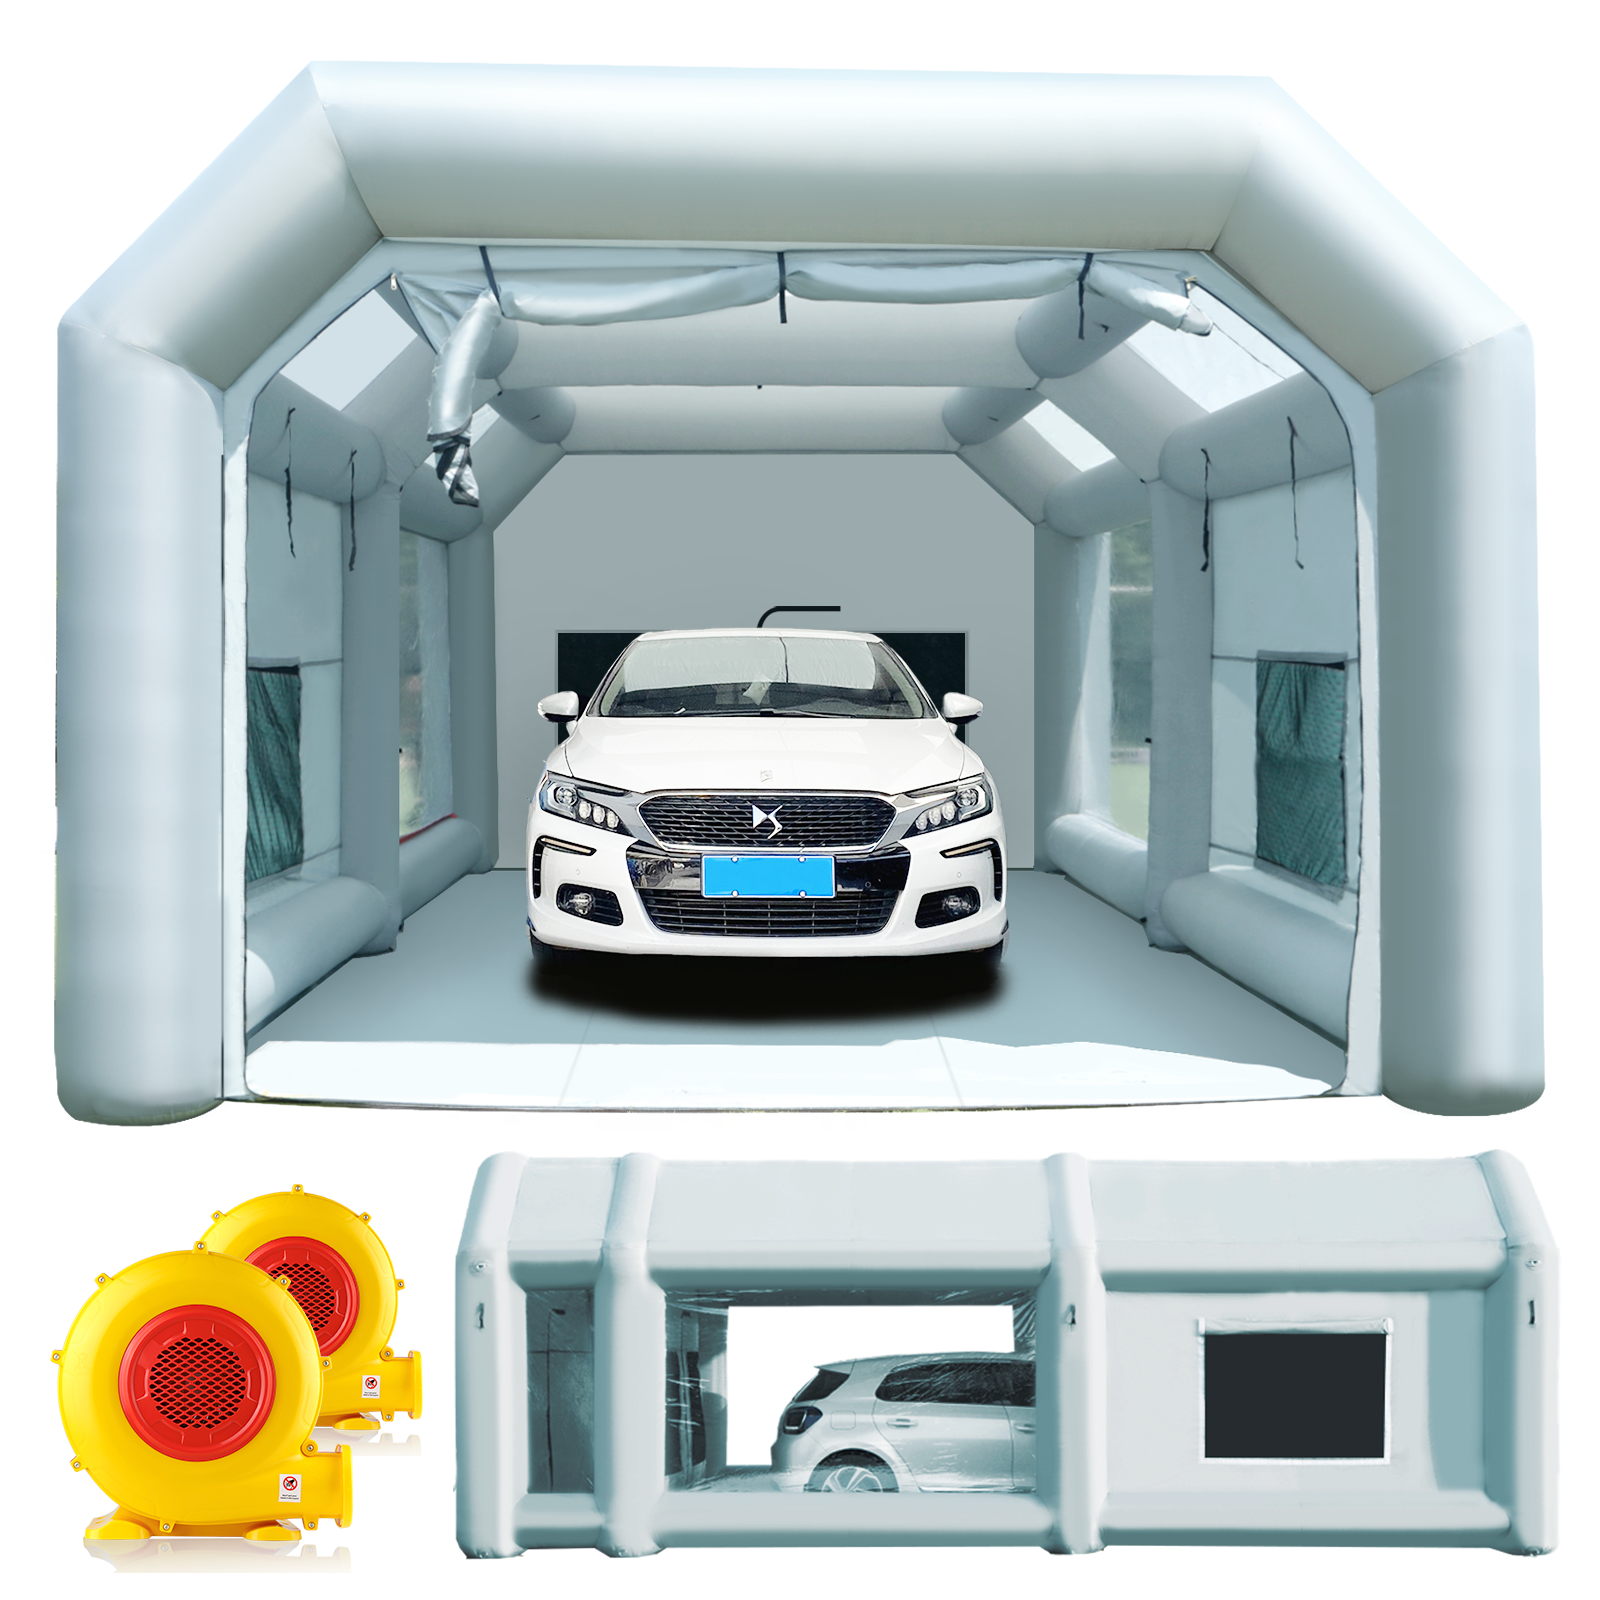 Sewinfla Professional Inflatable Paint Booth 26x15x10Ft with 2 Blowers (750W+950W) & Air Filter System Portable Paint Booth Tent Garage Inflatable Spray Booth Painting for Cars